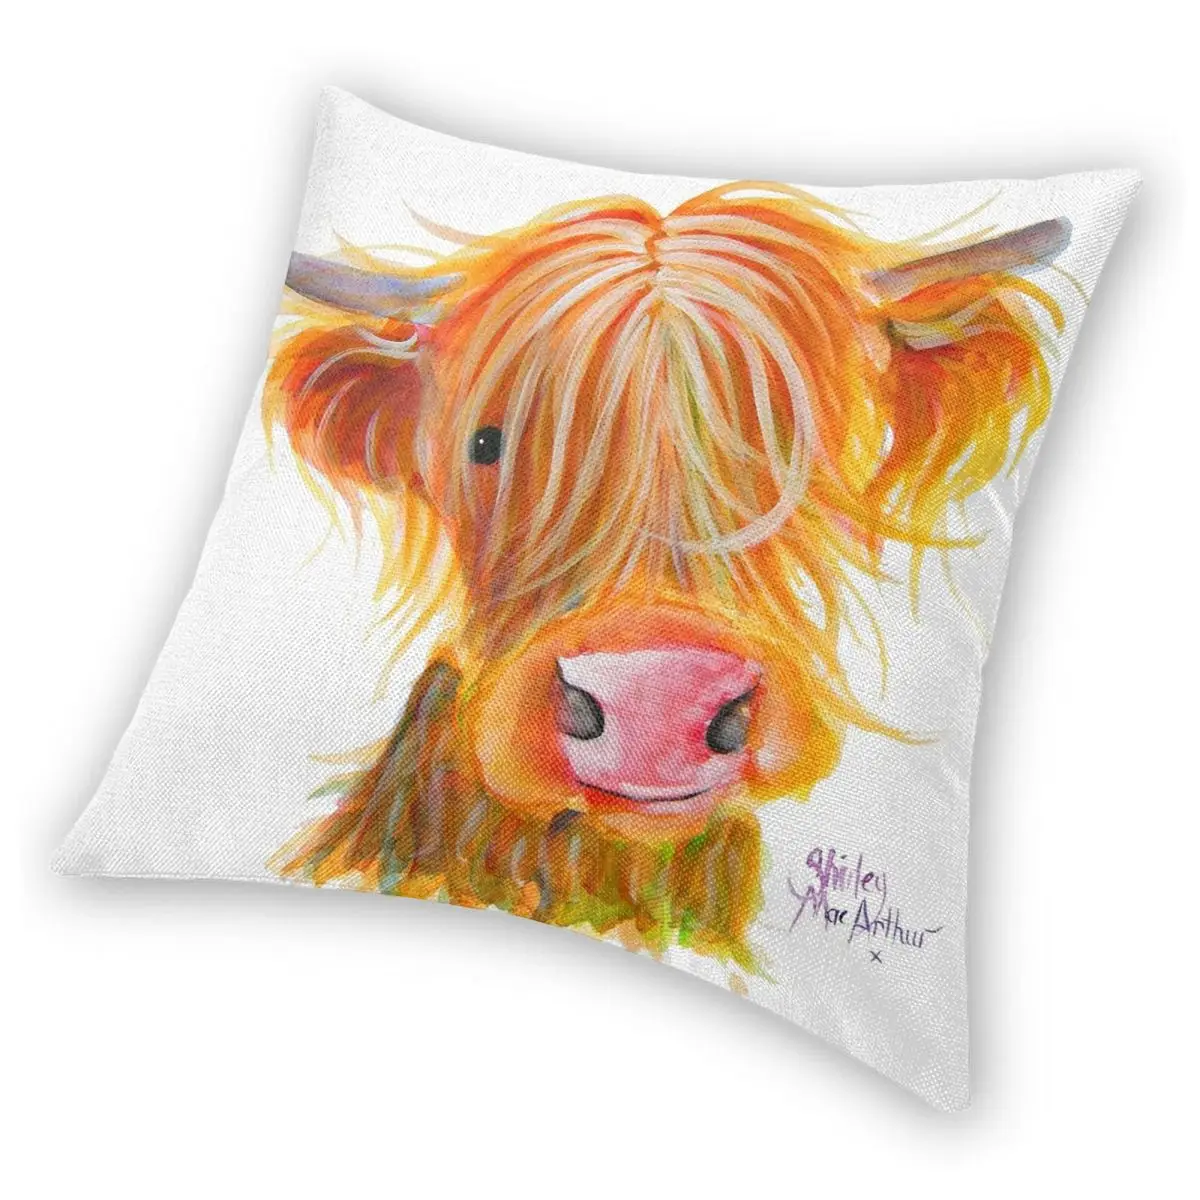 Scottish Highland Cow Square Pillowcase Polyester Linen Velvet Creative Zip Decorative Pillow Case Bed Cushion Cover 18" images - 6